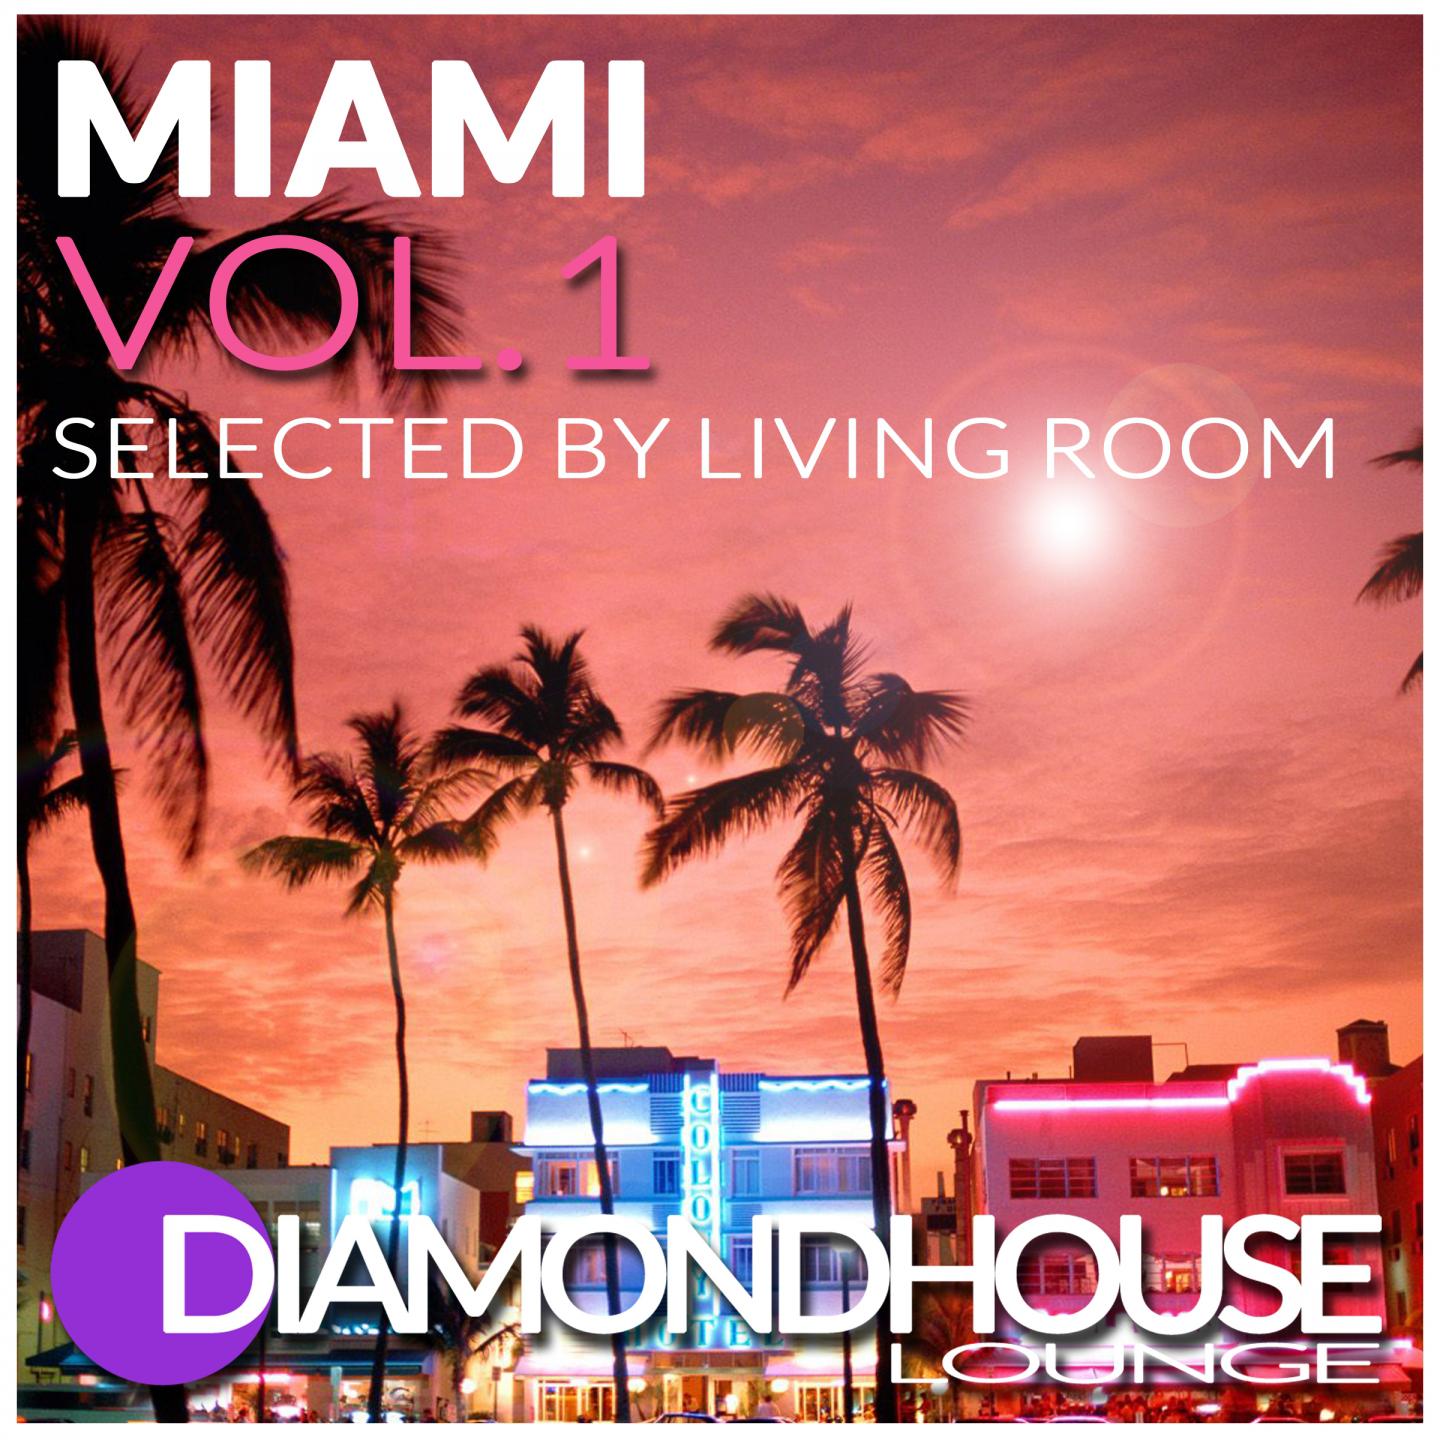 Diamondhouse Lounge: Miami, Vol. 1 (Selected by Living Room)